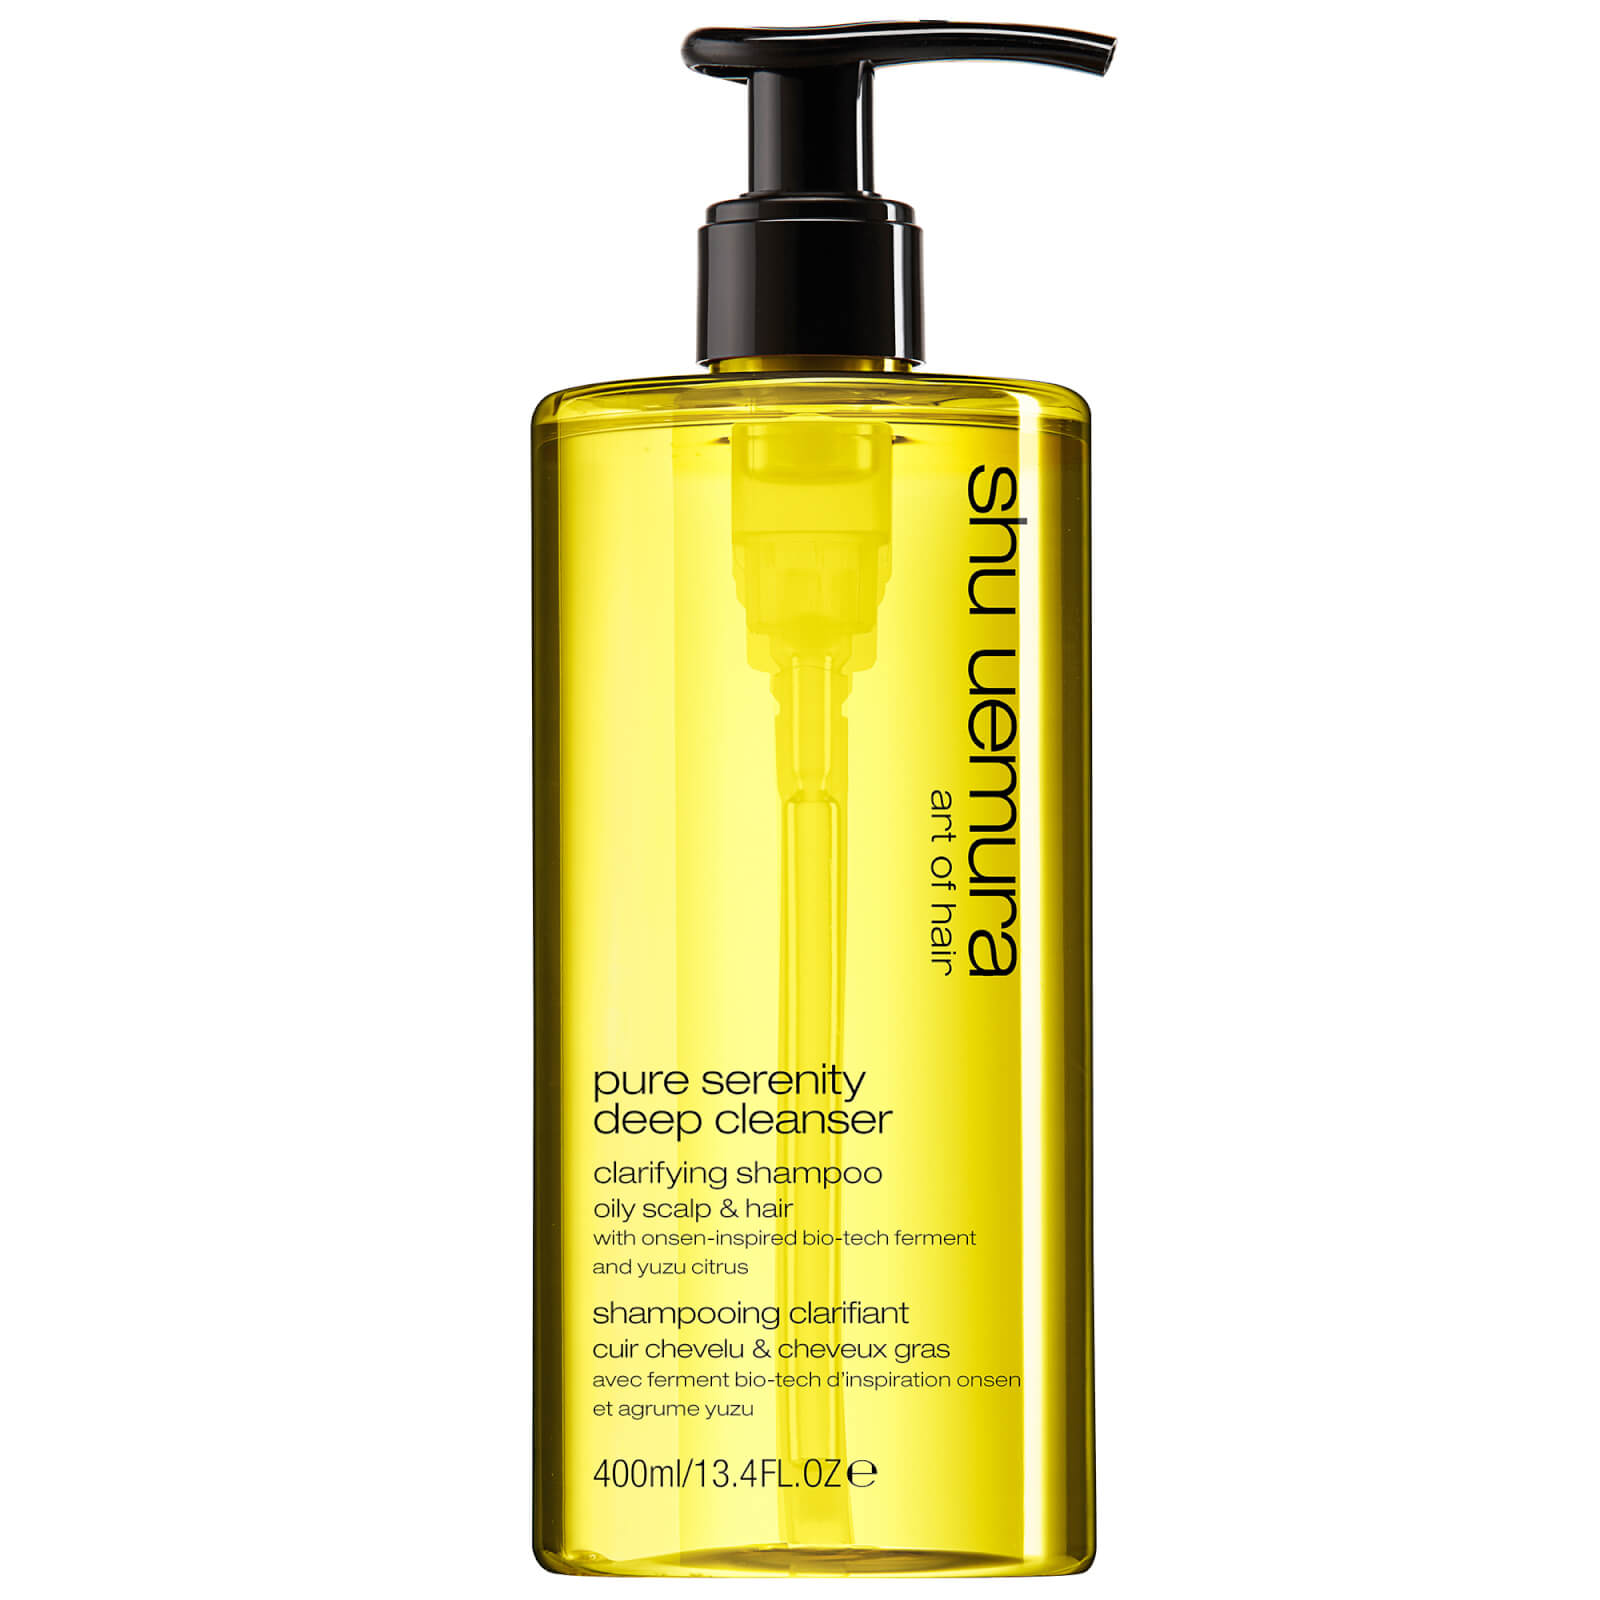 Photos - Facial / Body Cleansing Product Shu Uemura Art of Hair Pure Serenity Cleansing Oil 400ml E3891900